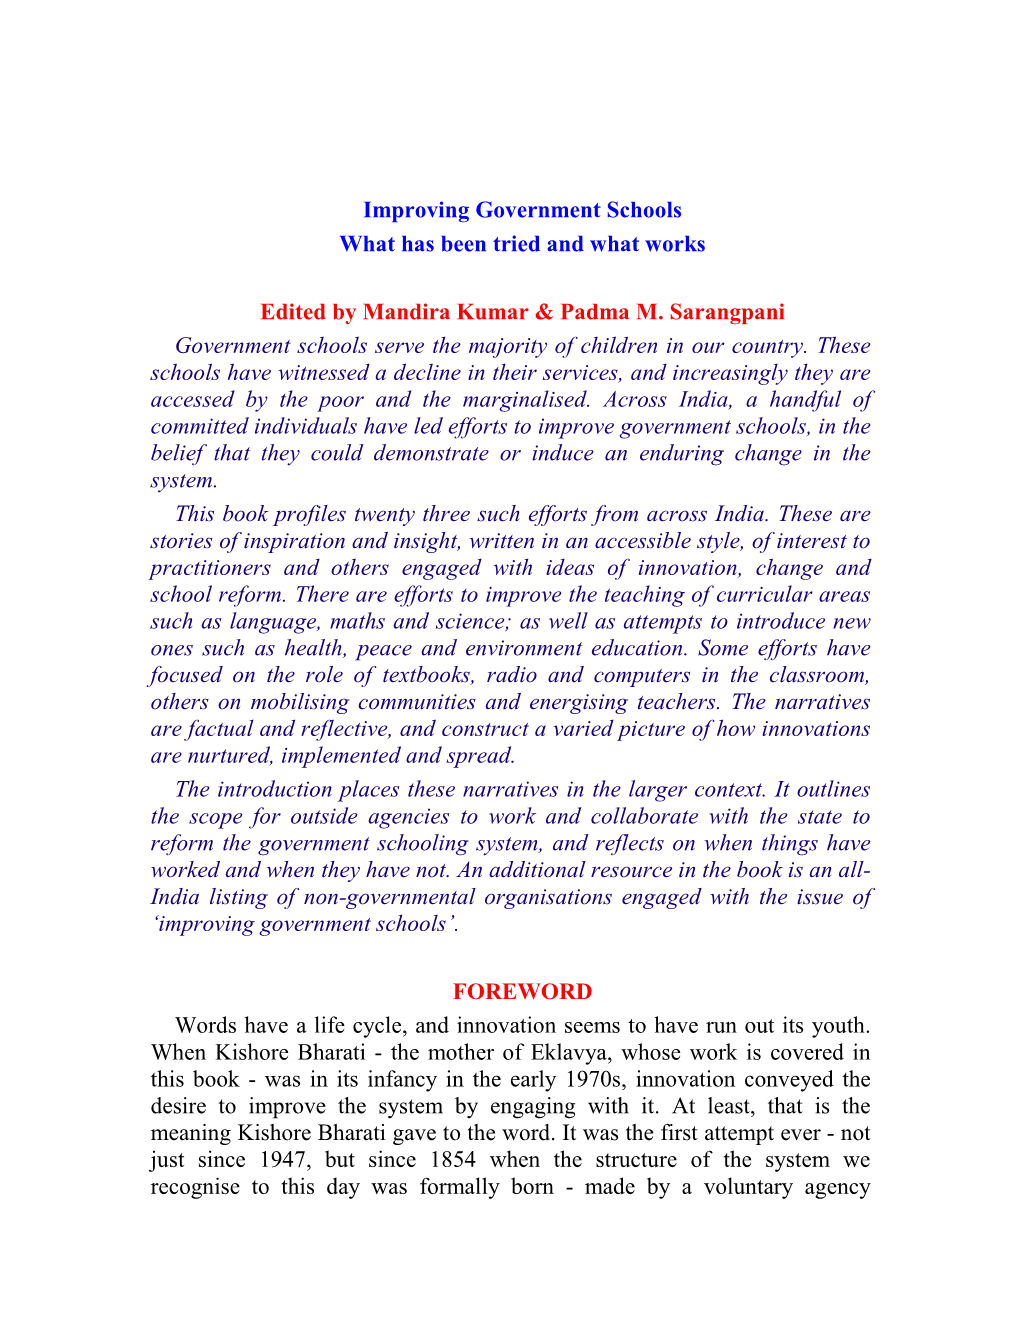 Improving Government Schools What Has Been Tried and What Works Edited by Mandira Kumar & Padma M. Sarangpani Government